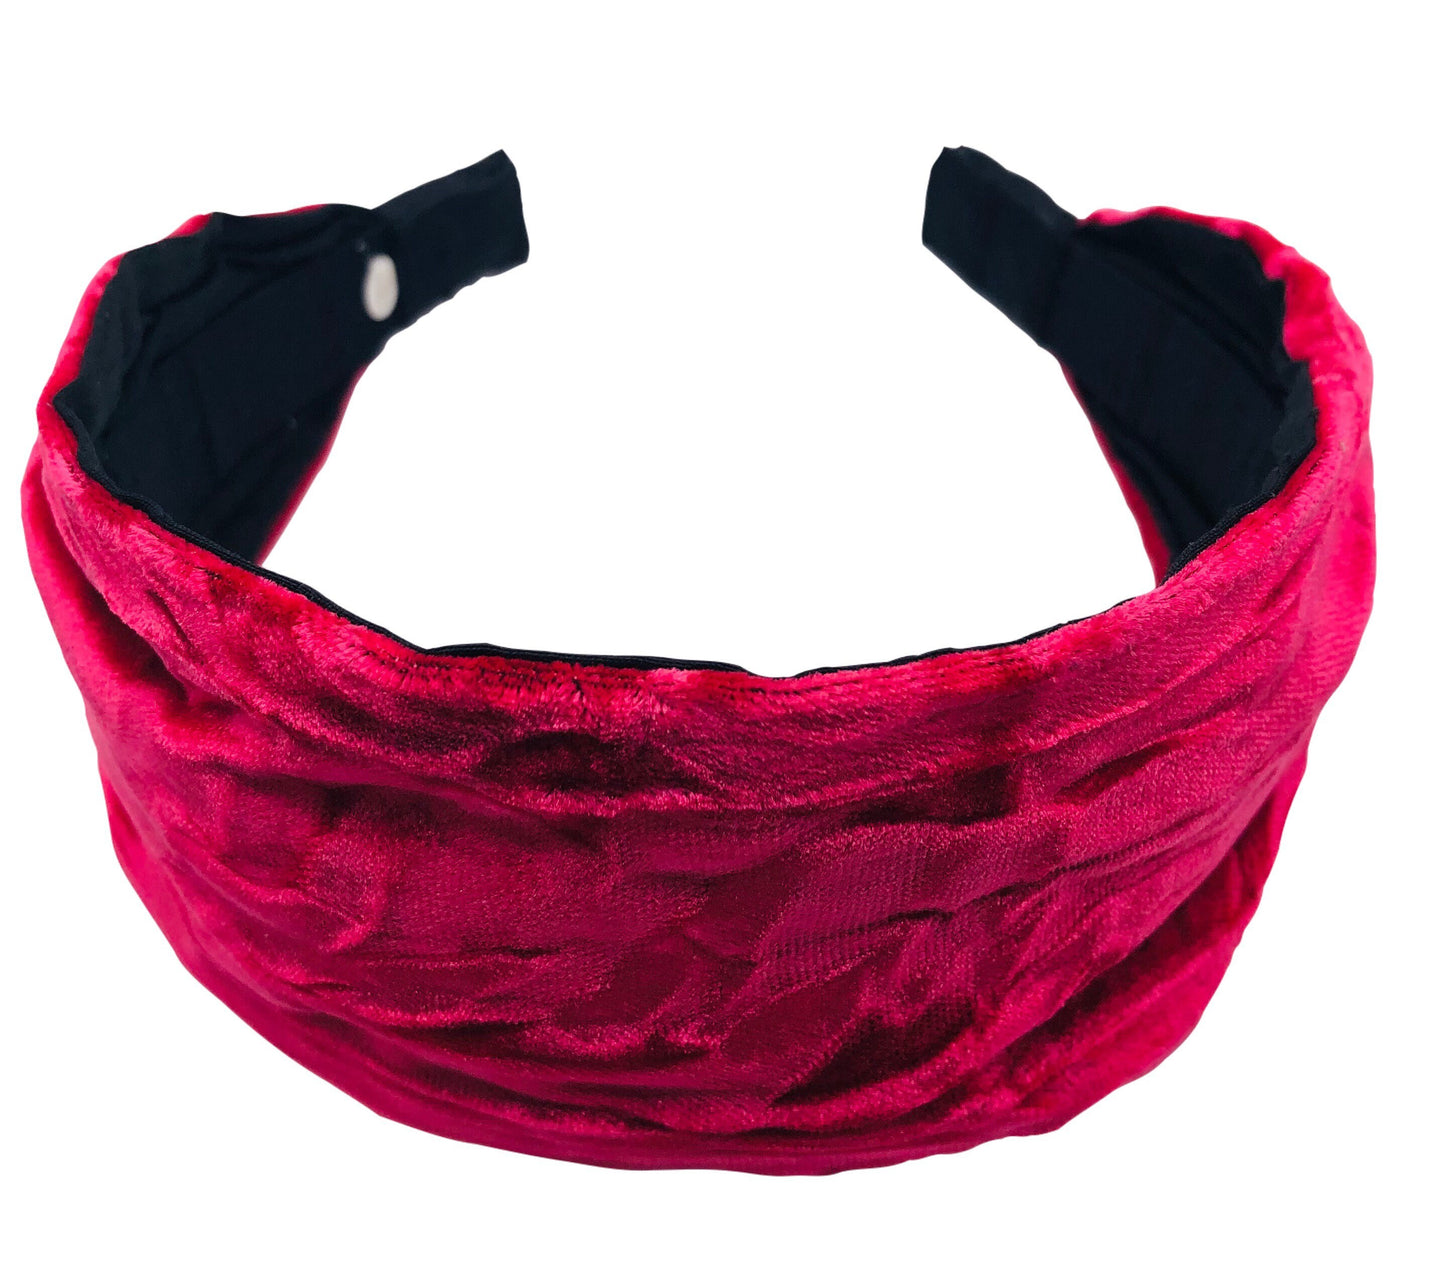 Karin's Garden 2.5-3" Crushed Velvet Scarf Headband.  Made in the USA.  Fabric from Germany.